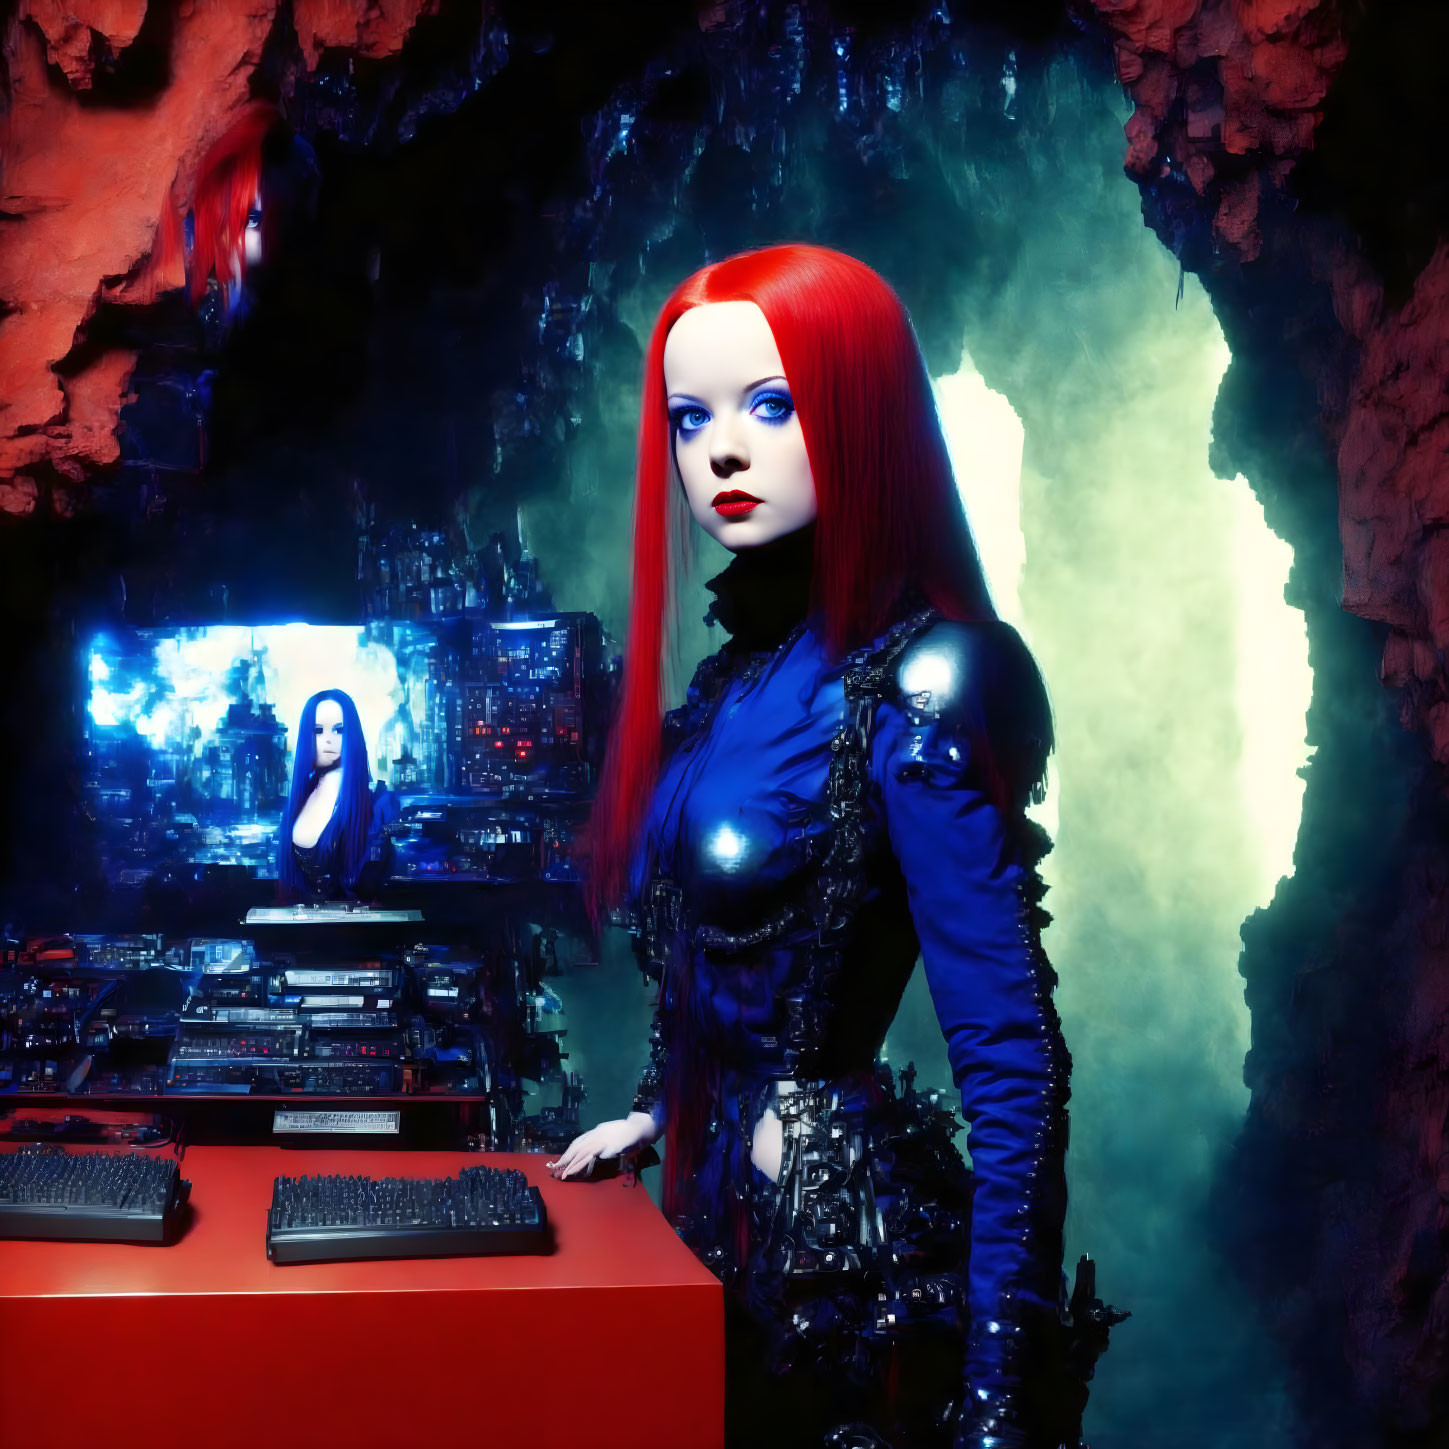 Striking red-haired woman in futuristic attire in neon-lit cave